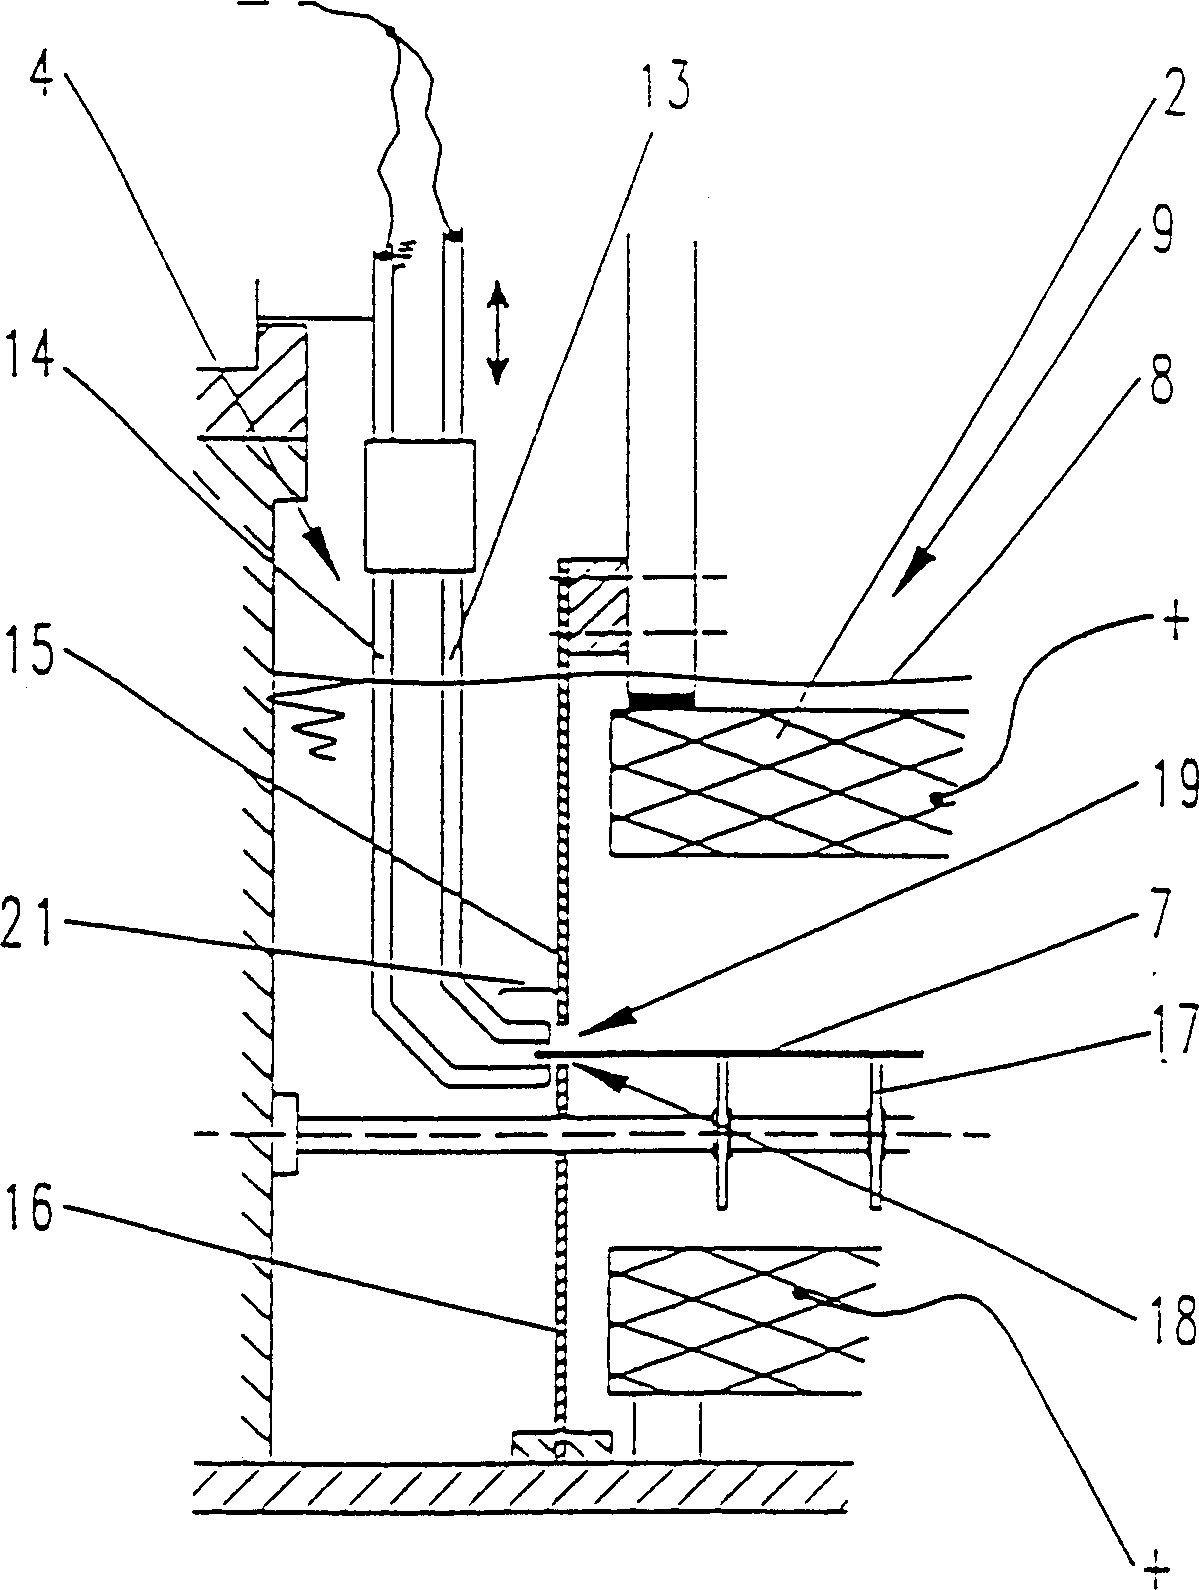 Device and method for evening out thickness of metal layers on electrical contact points on items that are to be treated